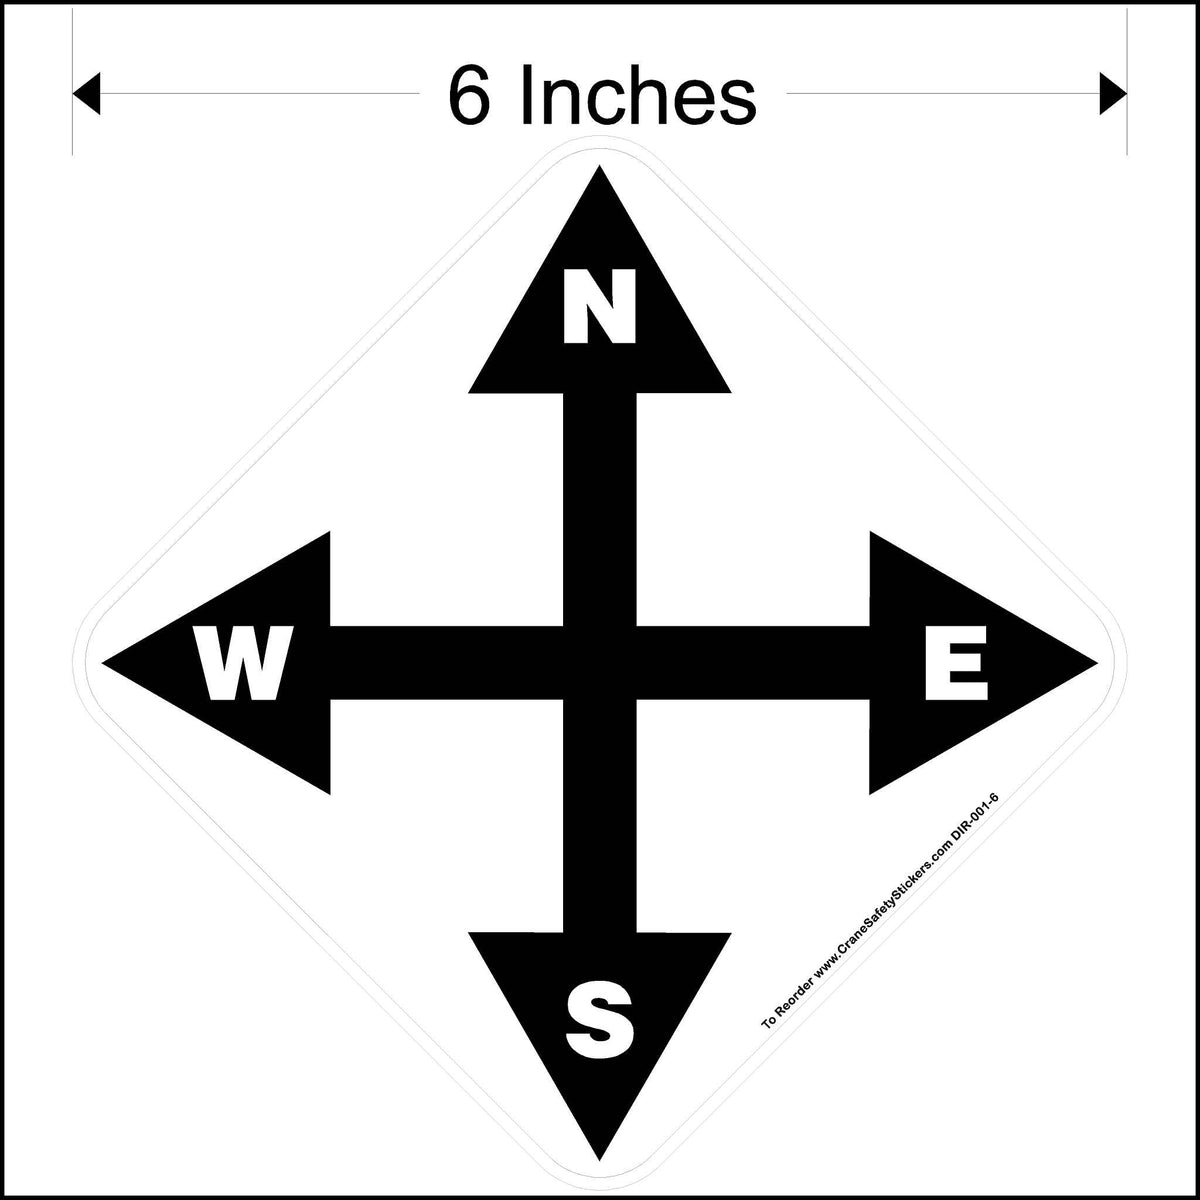 6 Inch North South East West Overhead Crane Directional Decal.